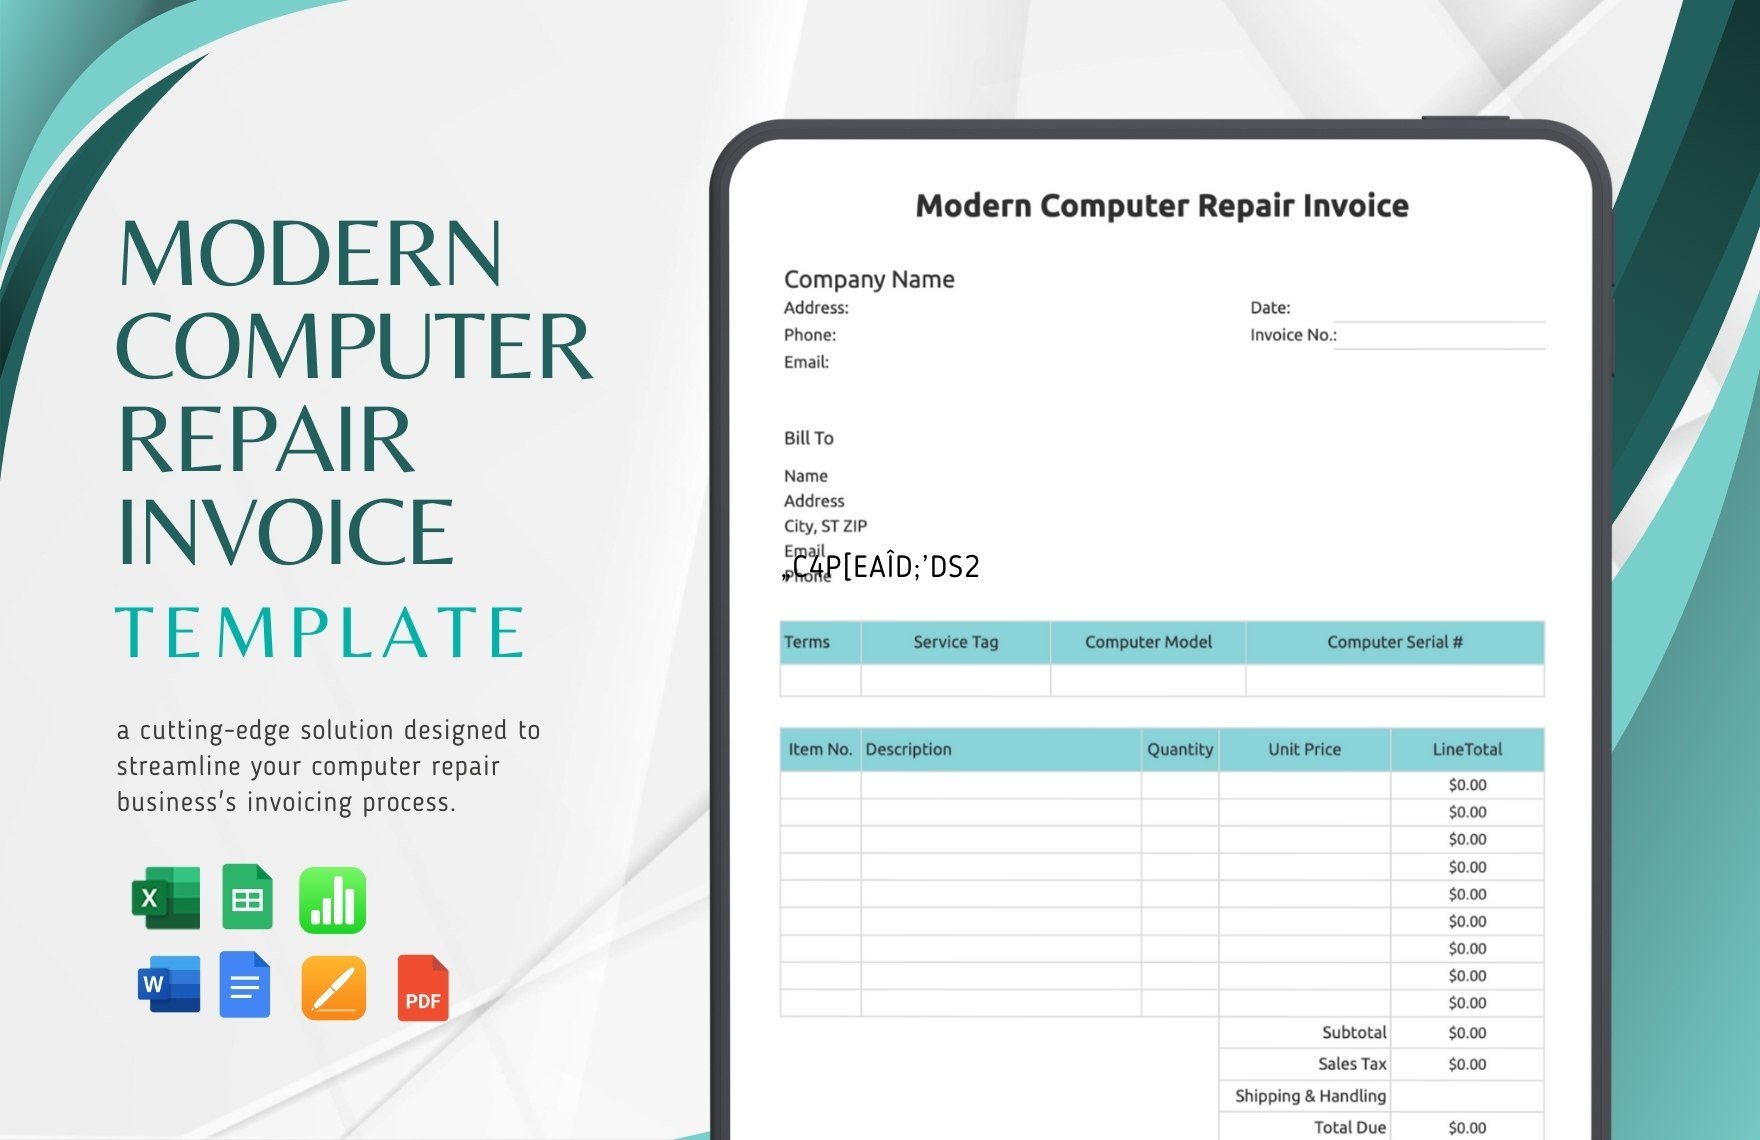 Free Modern Computer Repair Invoice Template in Word, Google Docs, Excel, PDF, Google Sheets, Apple Pages, Apple Numbers